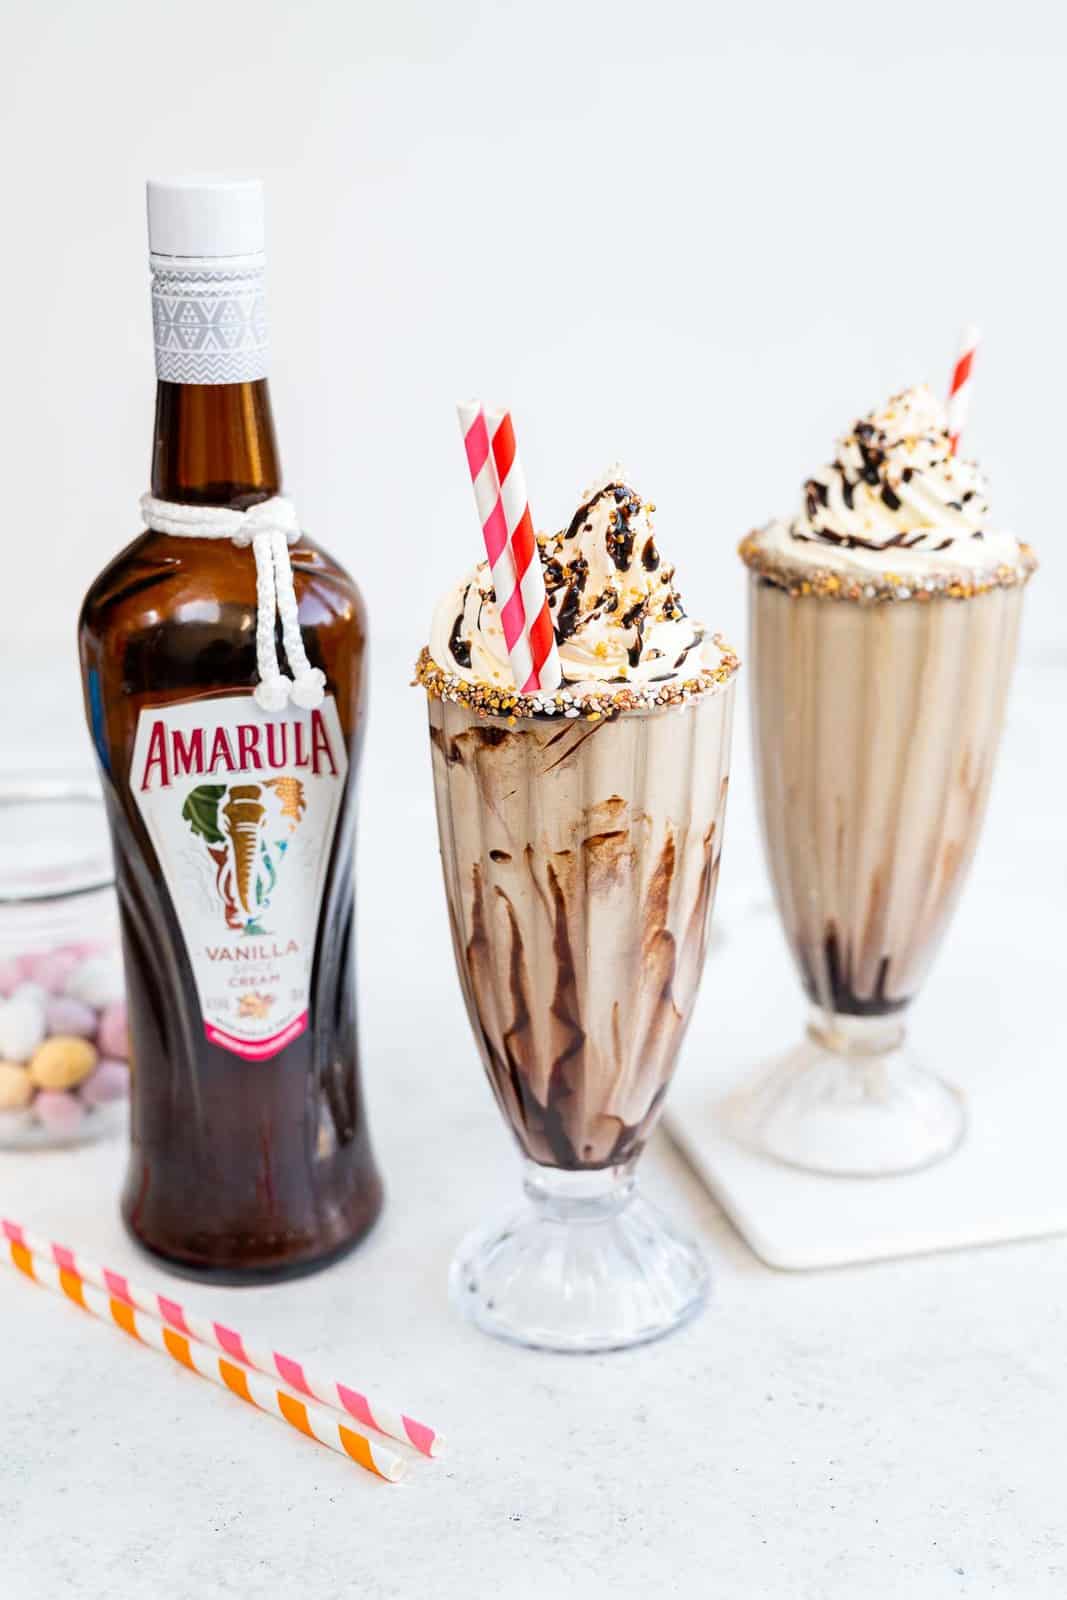 Boozy Vanilla milkshakes served in sundae glasses topped with whipped cream and chocolate sauce